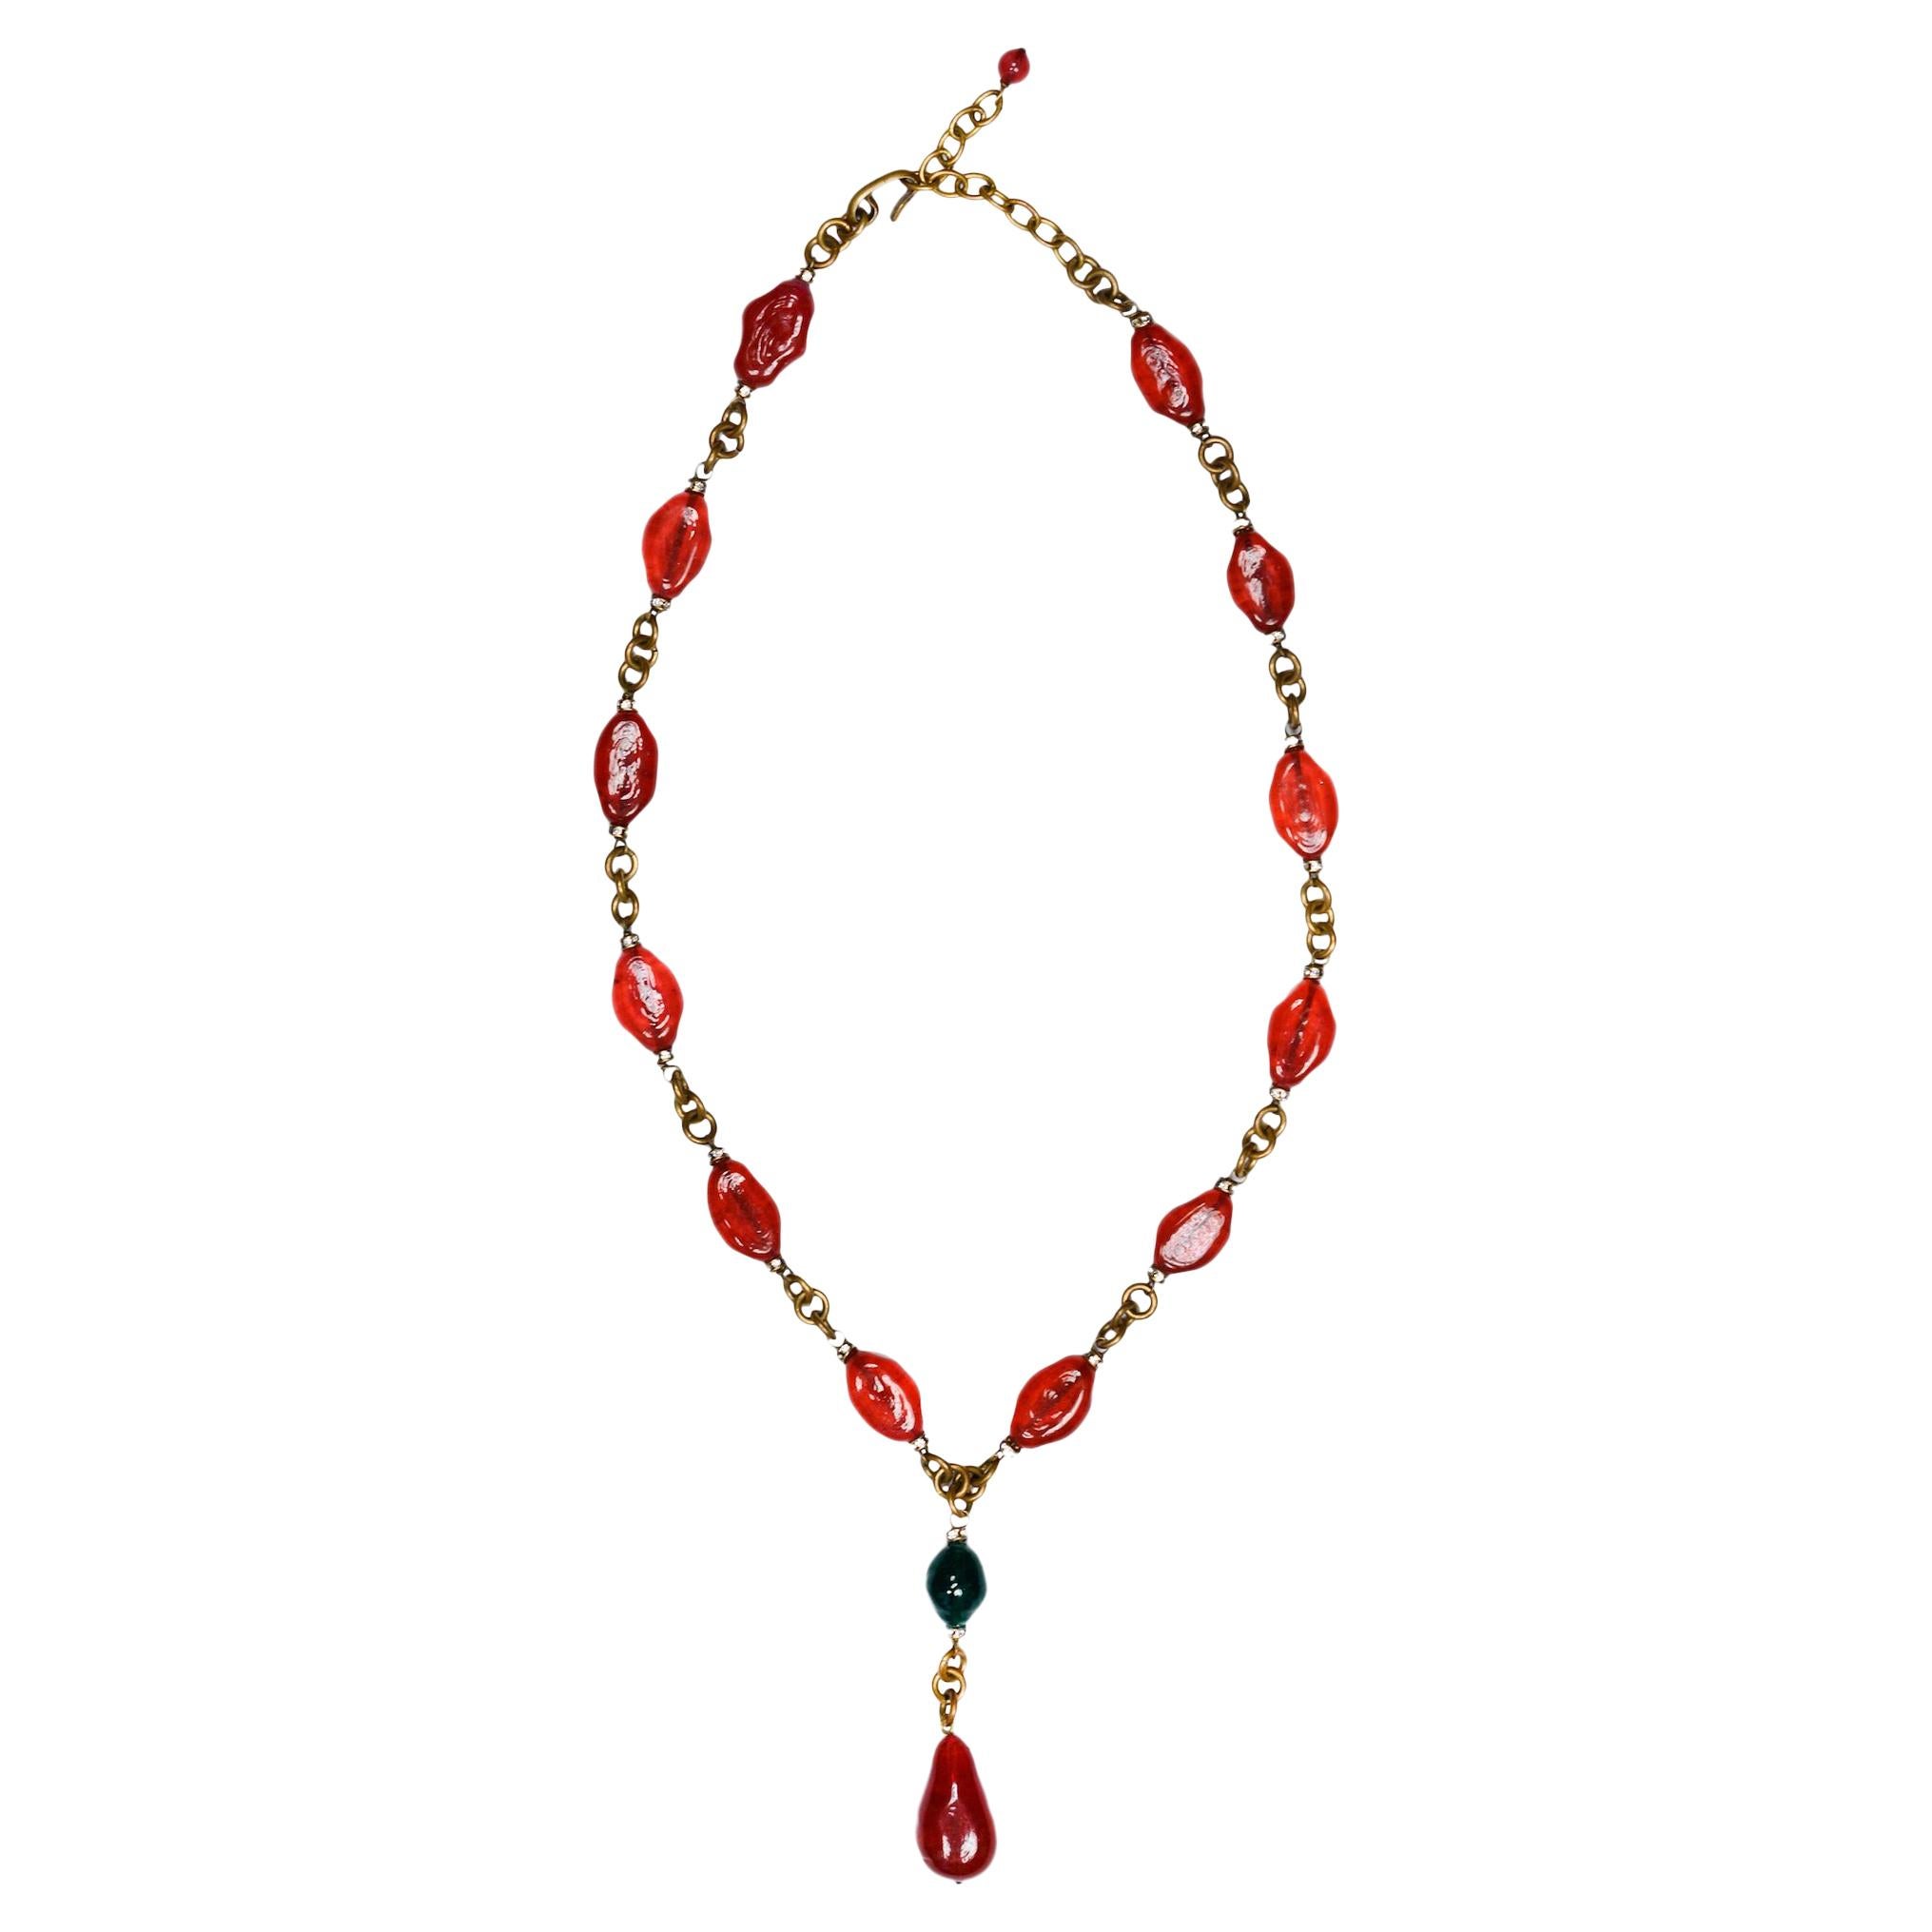 Vintage Chanel Red & Green Gripoix Drop Necklace